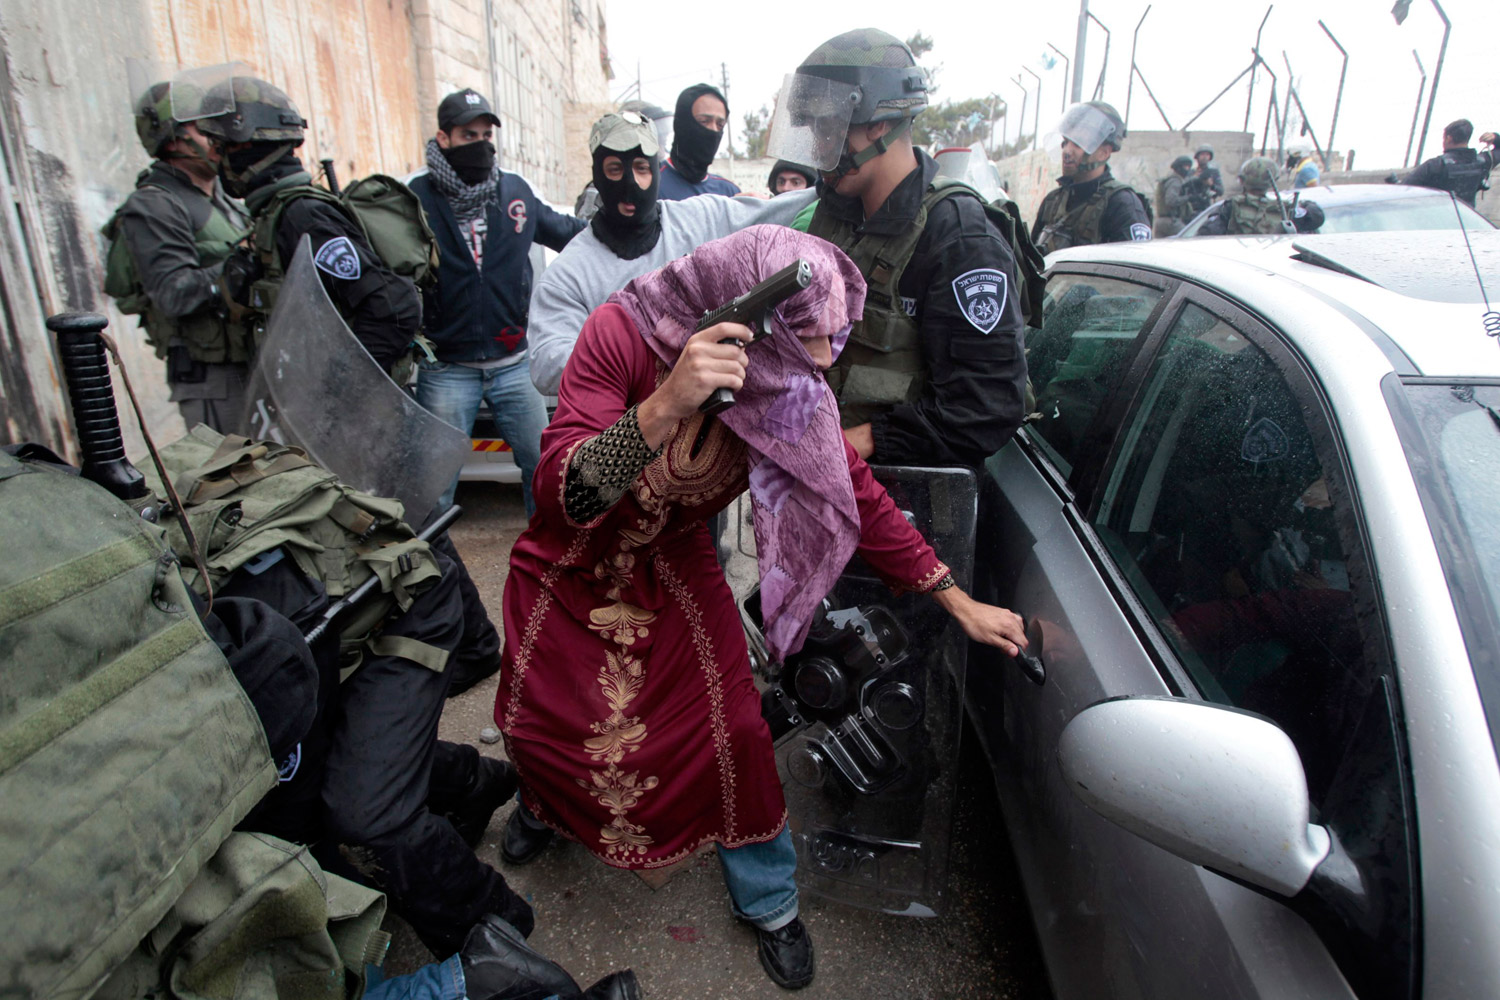 May 15, 2011. An undercover Israeli policeman dressed as a Palestinian woman opens a car door after detaining a Palestinian protester during clashes in Shuafat refugee camp, in the West Bank near Jerusalem. Israeli security forces had been on alert for violence on Sunday, the day Palestinians mourn the  Nakba,  or catastrophe, of Israel's founding in a 1948 war, when hundreds of thousands of their brethren fled or were forced to leave their homes.